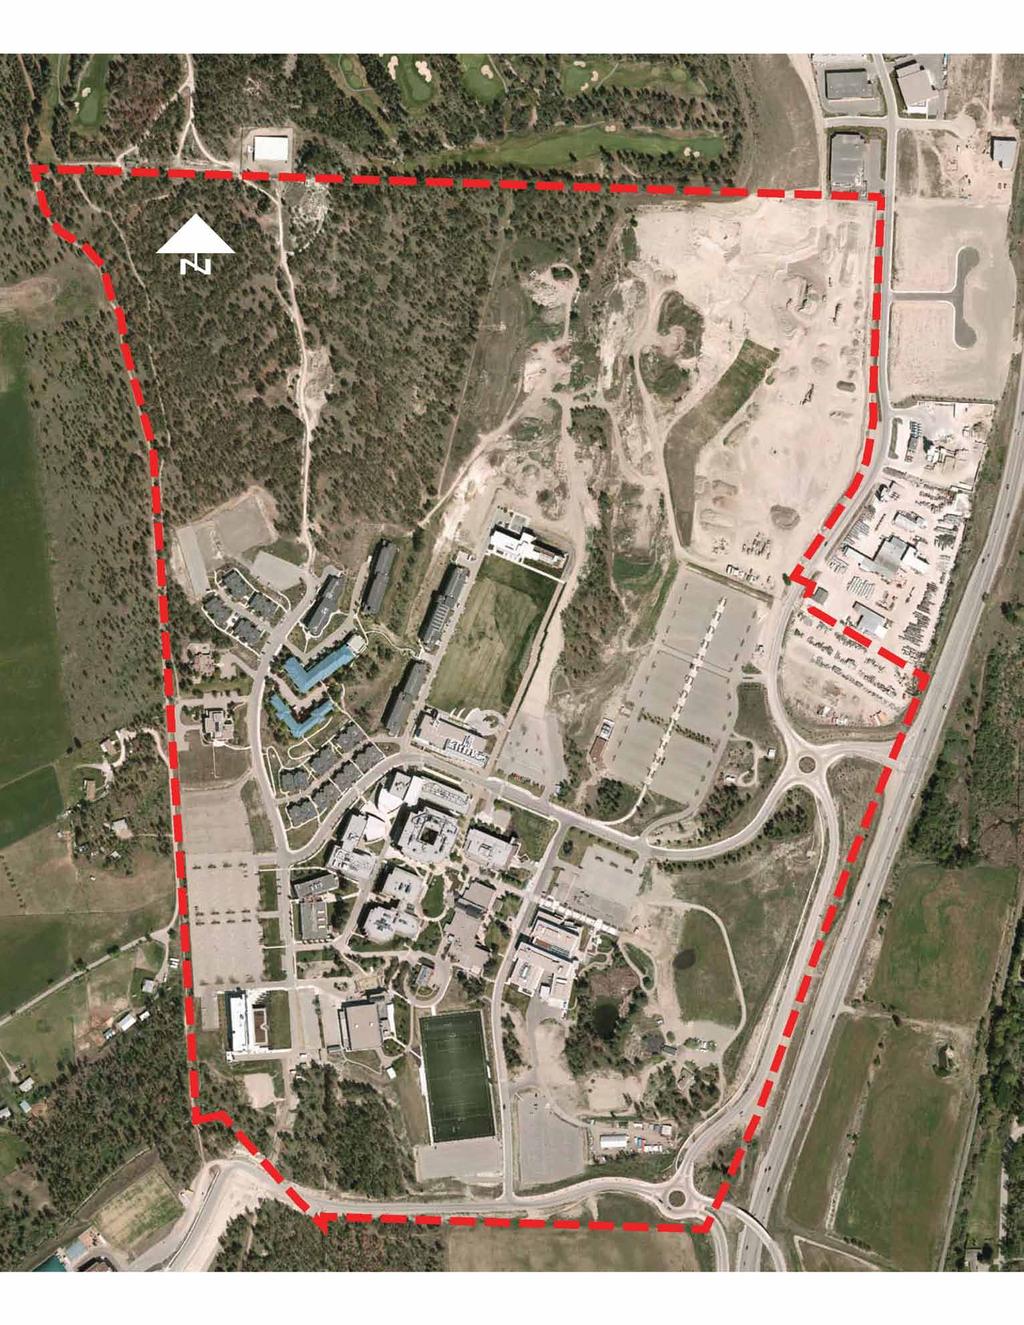 ALUMNI AVENUE 5 Scope of the 2015 Master Plan Update The existing campus is 105 hectares, excluding the newly acquired 103 hectares, referred to as the West Campus lands.